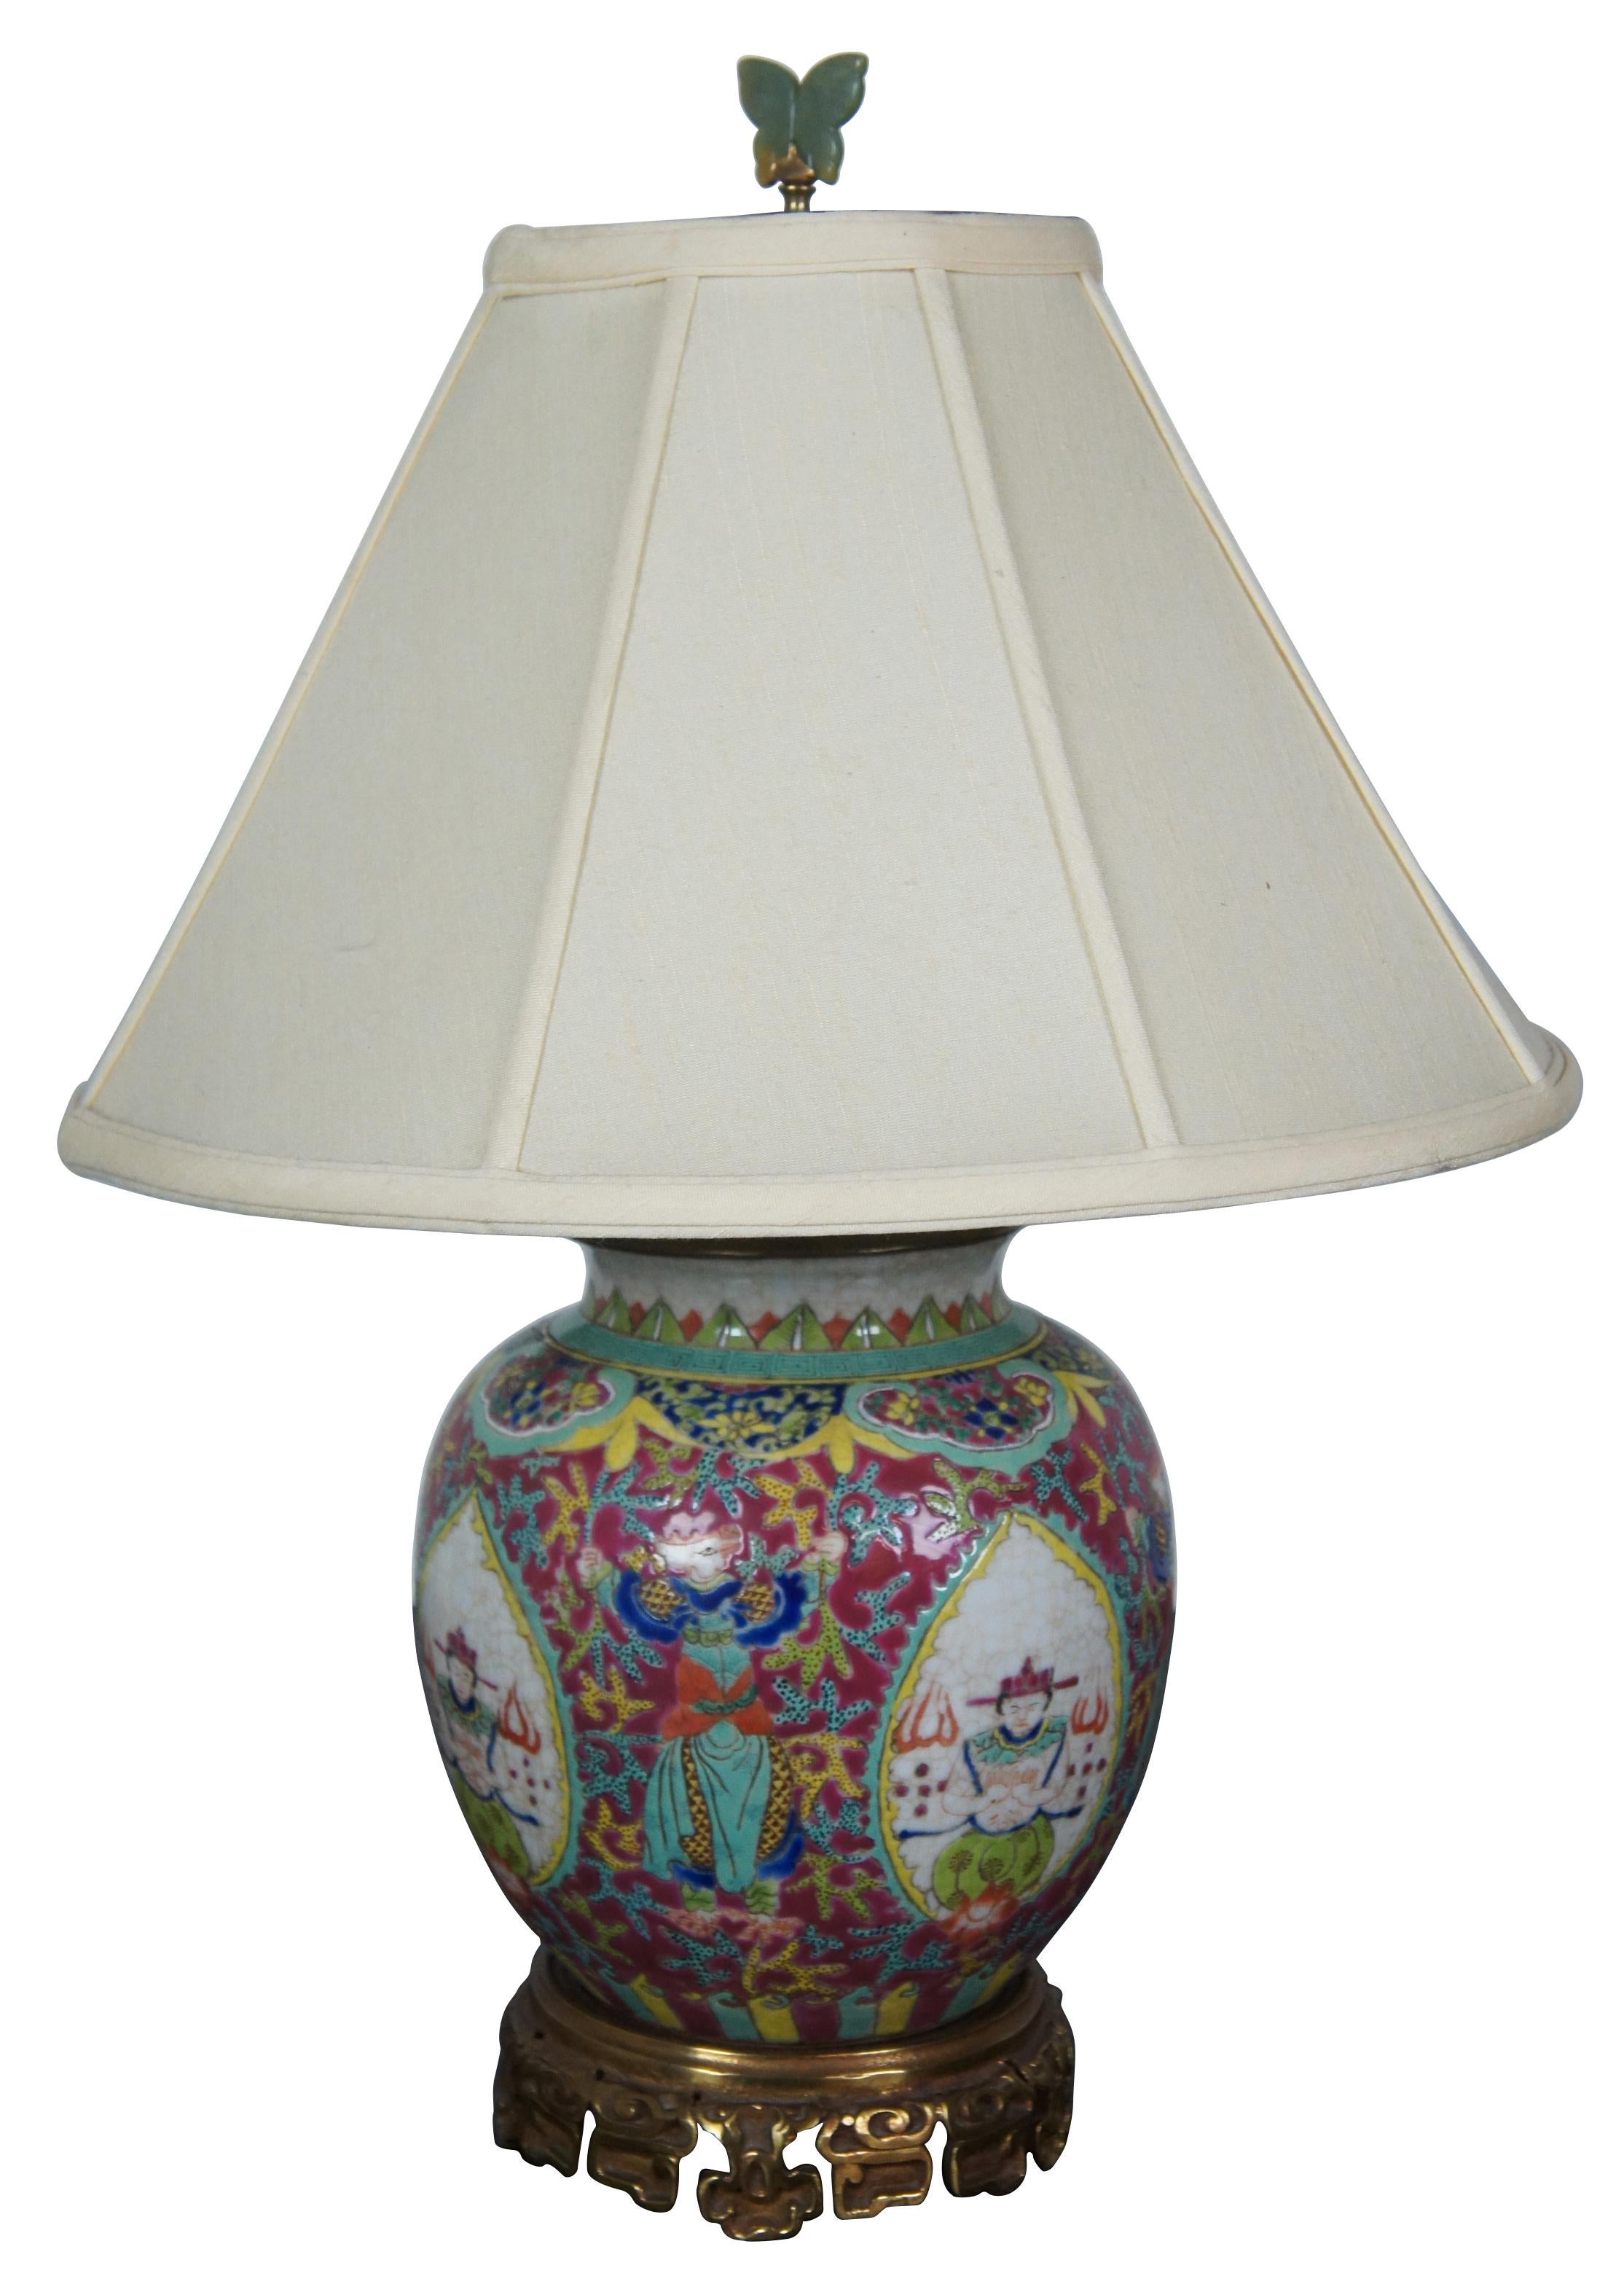 Vintage footed bronze and porcelain ginger jar table lamp featuring enameled figures with tongues of fire alternating with a dancing figure with the head of a chicken or bird. Features a jade butterfly finial and Greek key border.

Measures: Shade